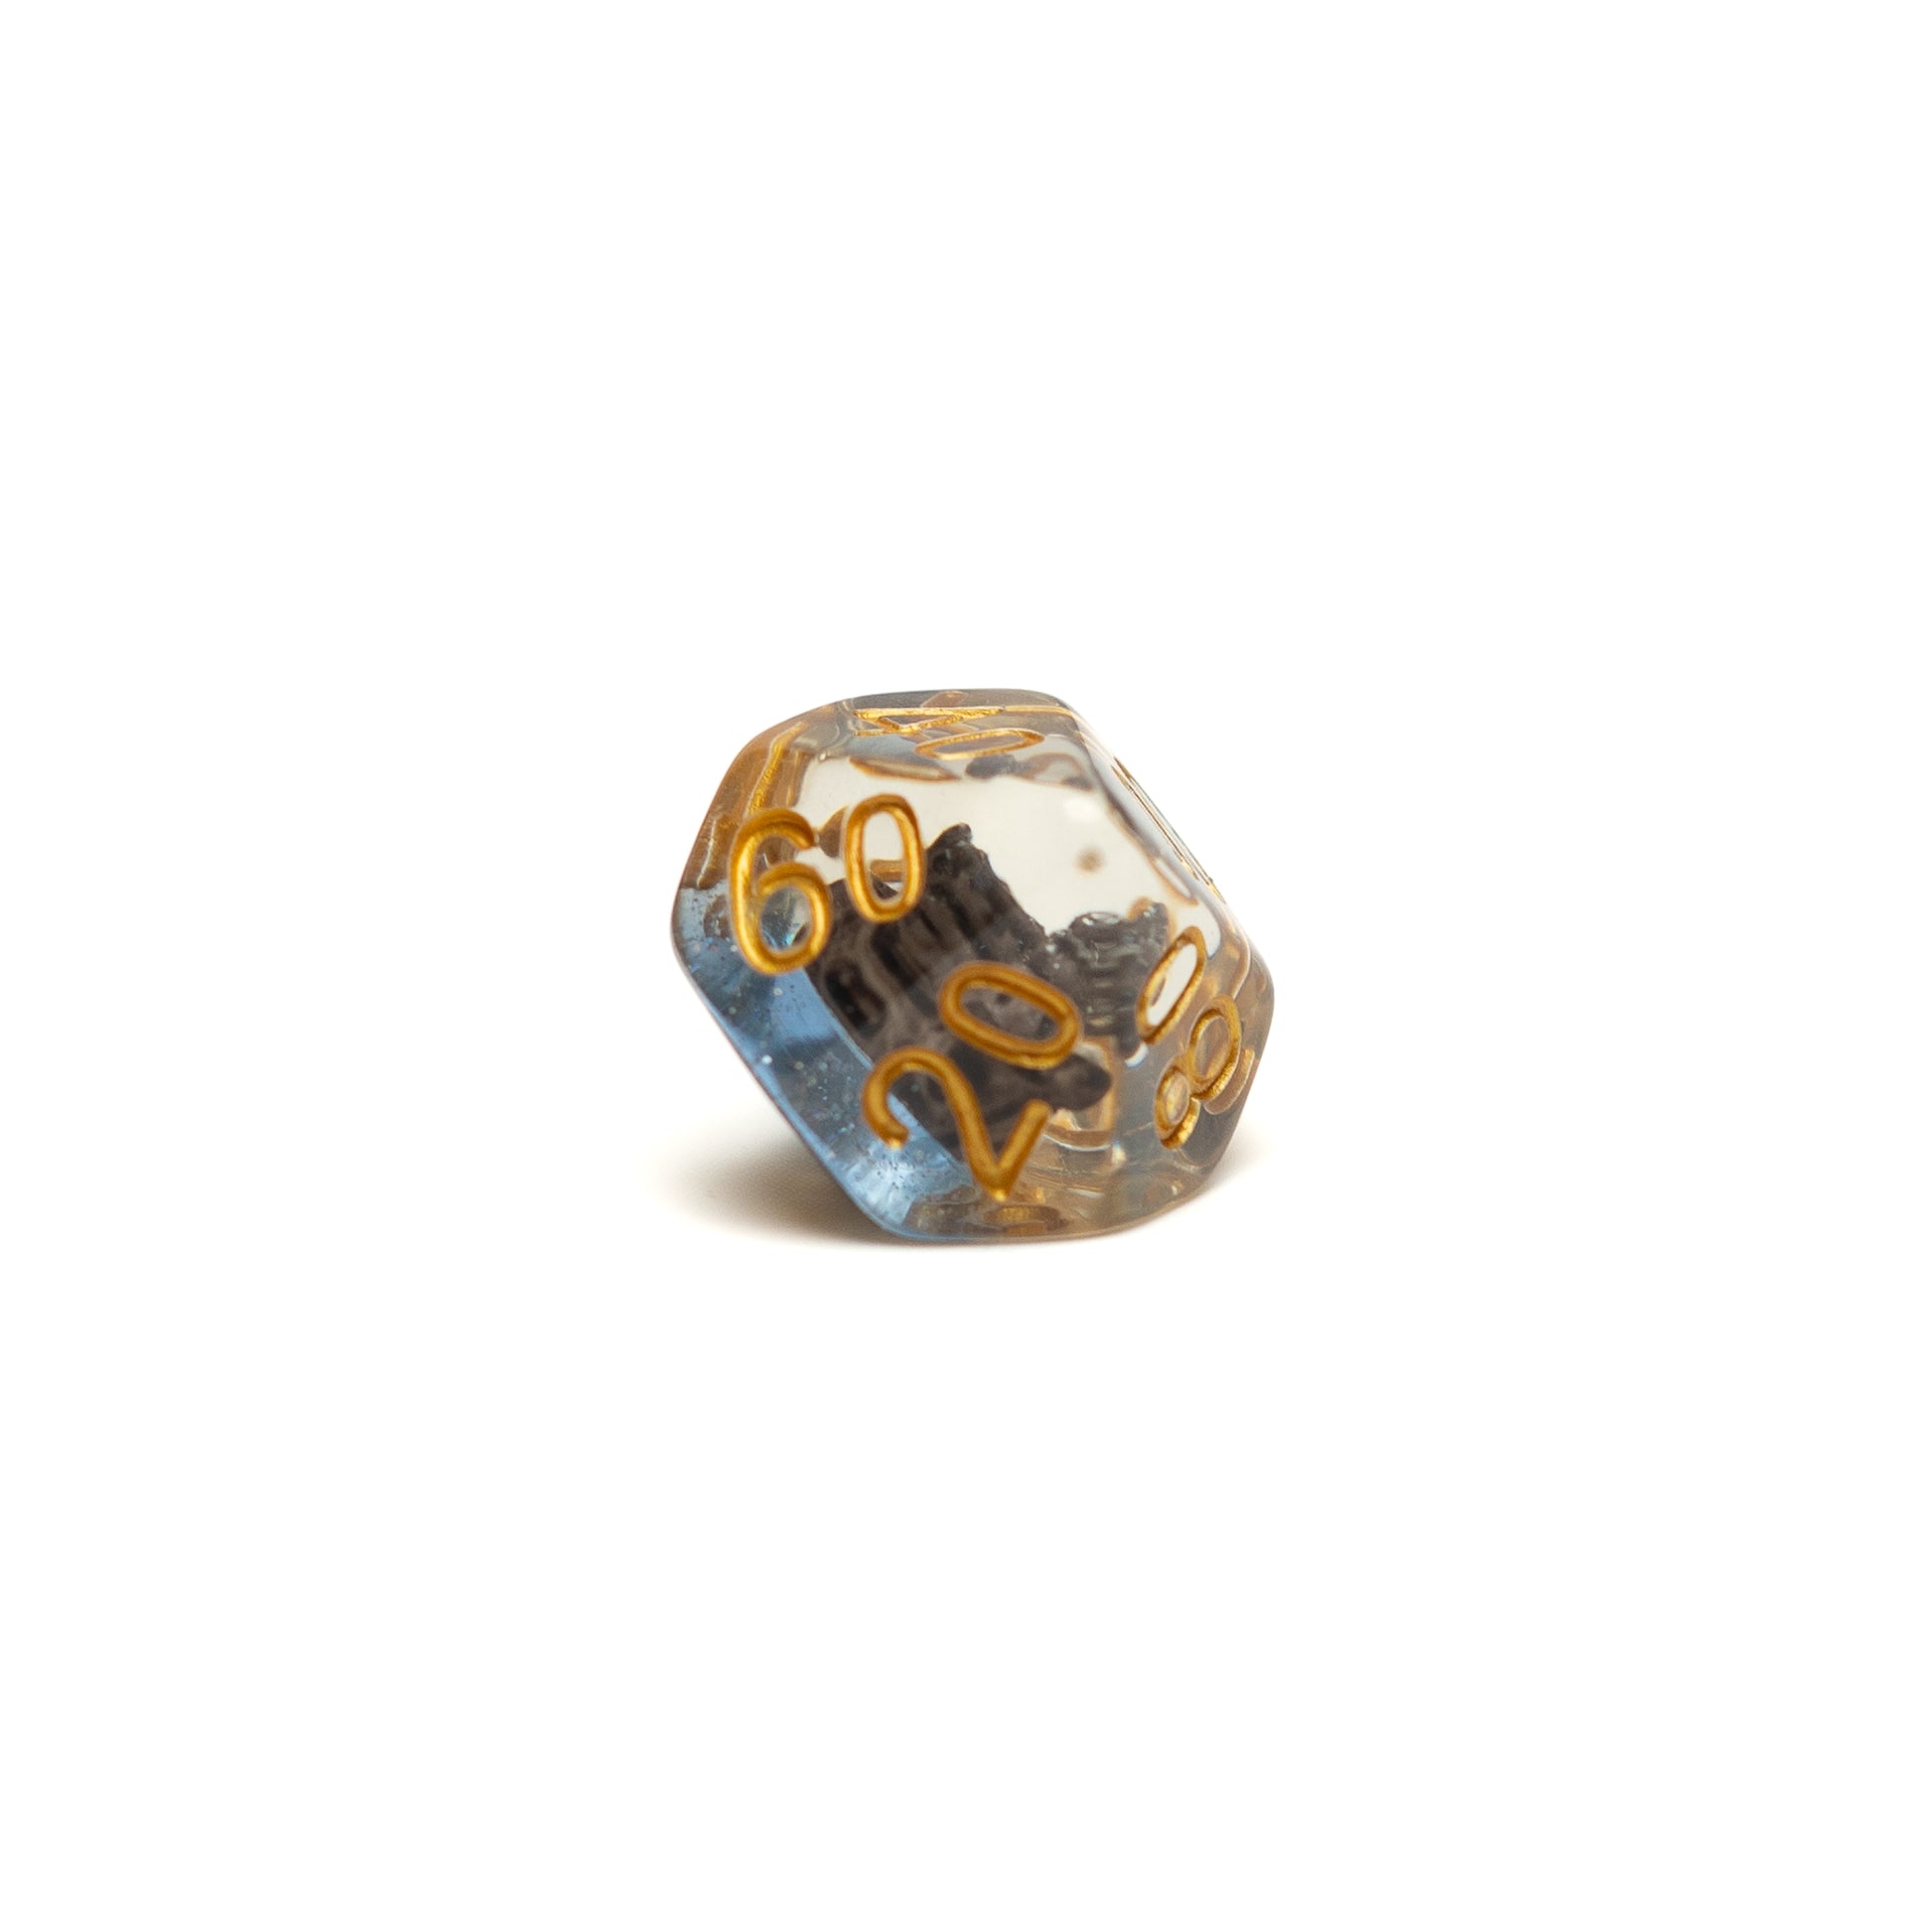 Roll Britannia Captain Timbers Dungeons and Dragons D10 percentile acrylic dice with ship and ocean inside